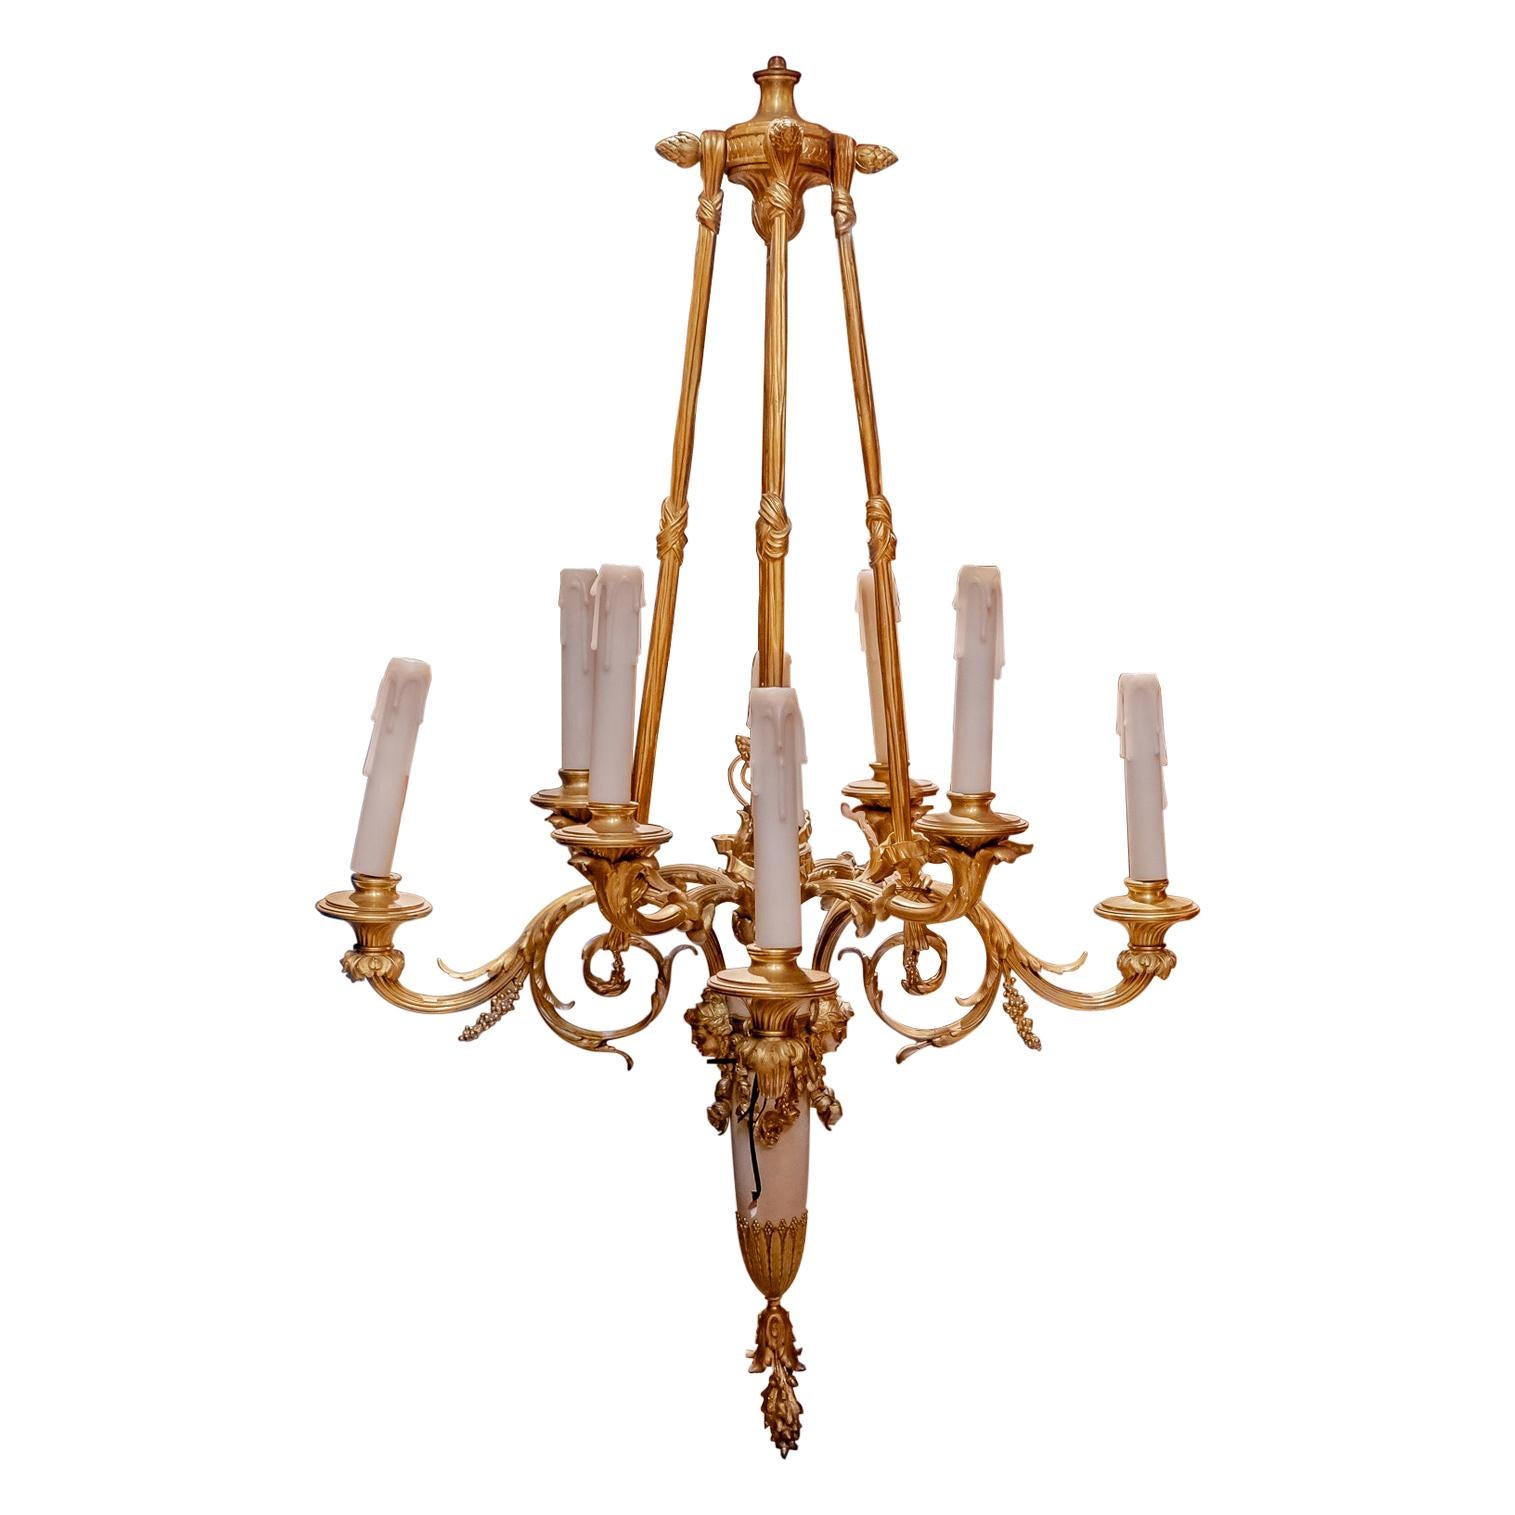 Very Fine 19th C French Louis XVI Gilt Bronze and Marble Louis XVI Chandelier For Sale